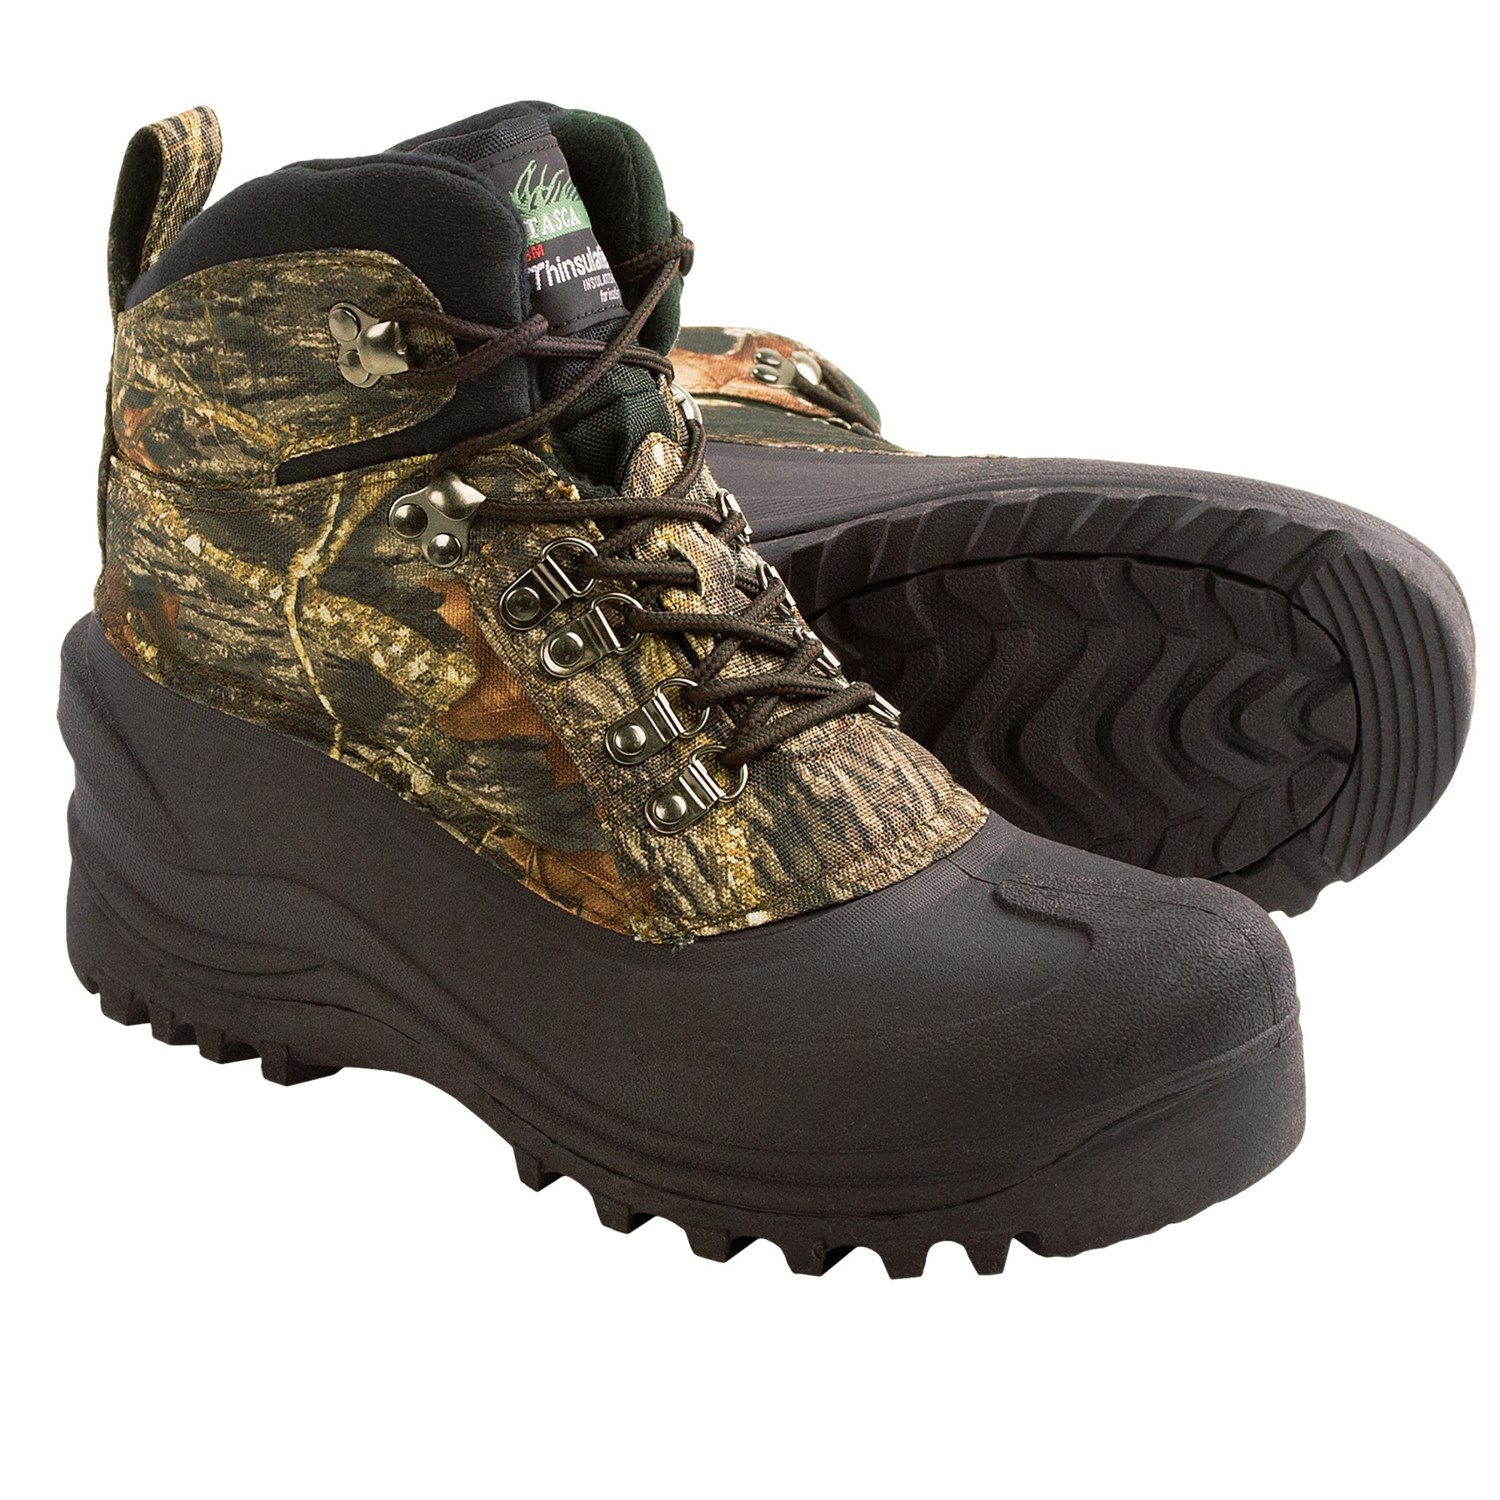 Itasca Icebreaker Snow Boots (For Men) 8787Y - Save 61%